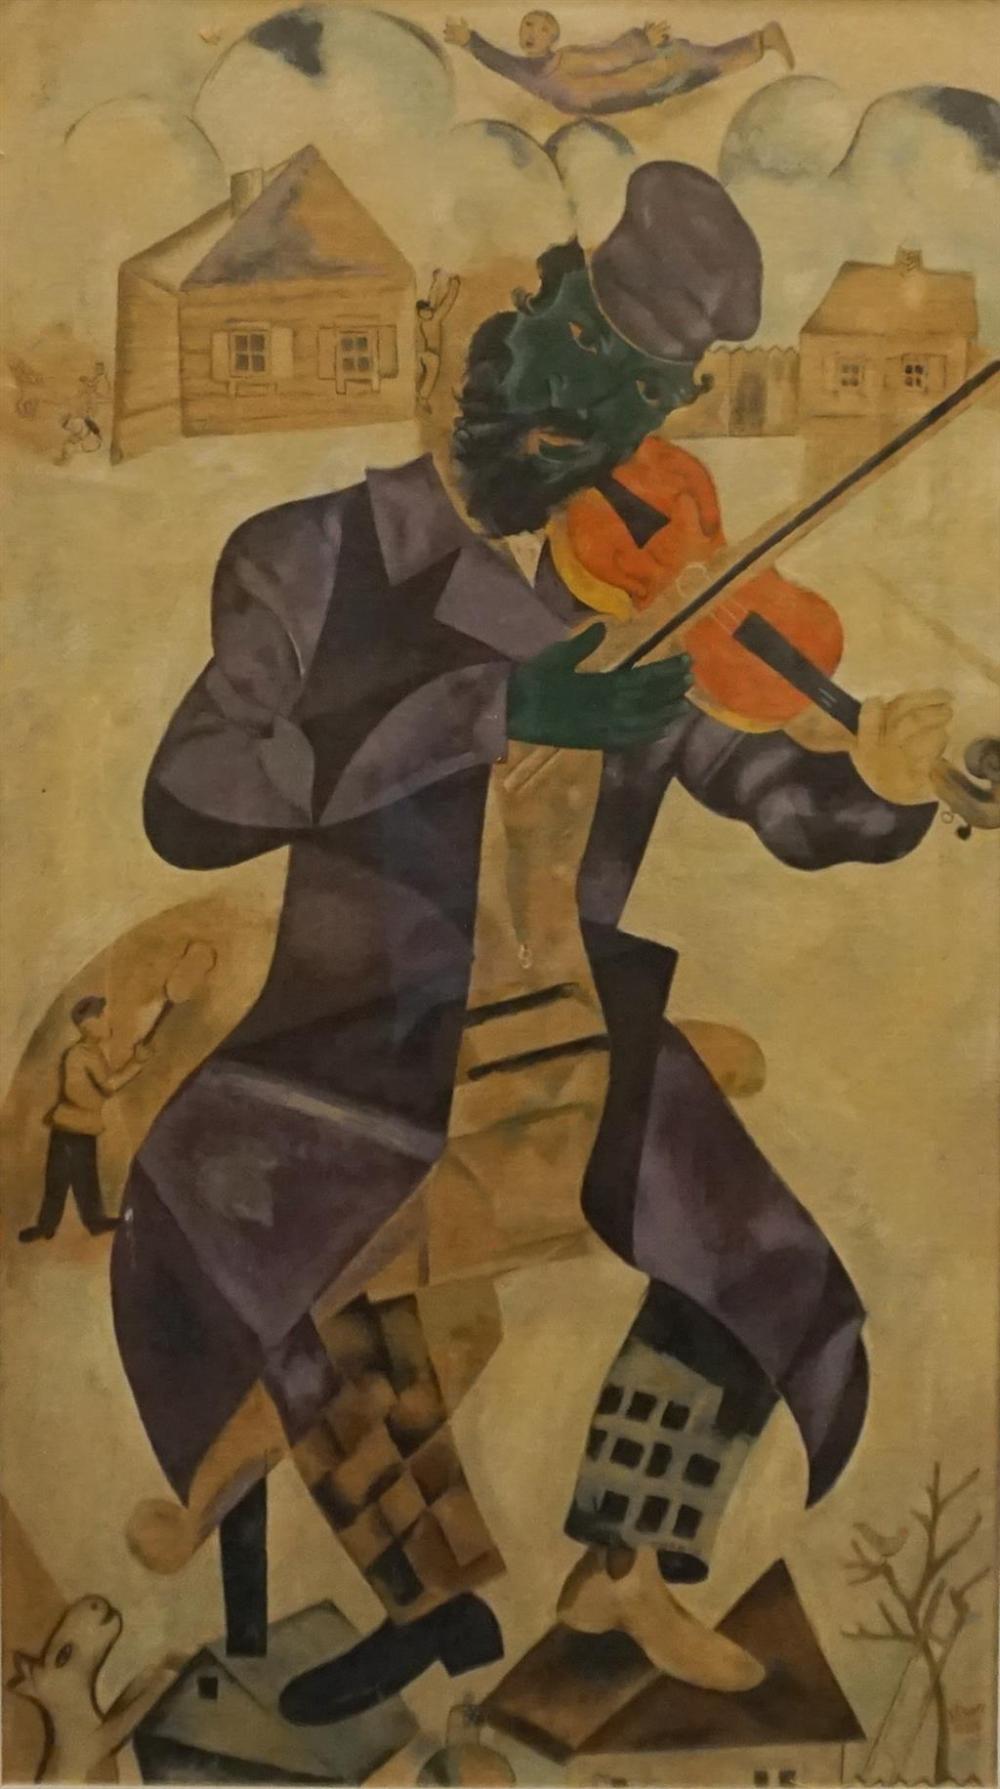 AFTER MARK CHAGALL, THE CLOWN VIOLINIST,